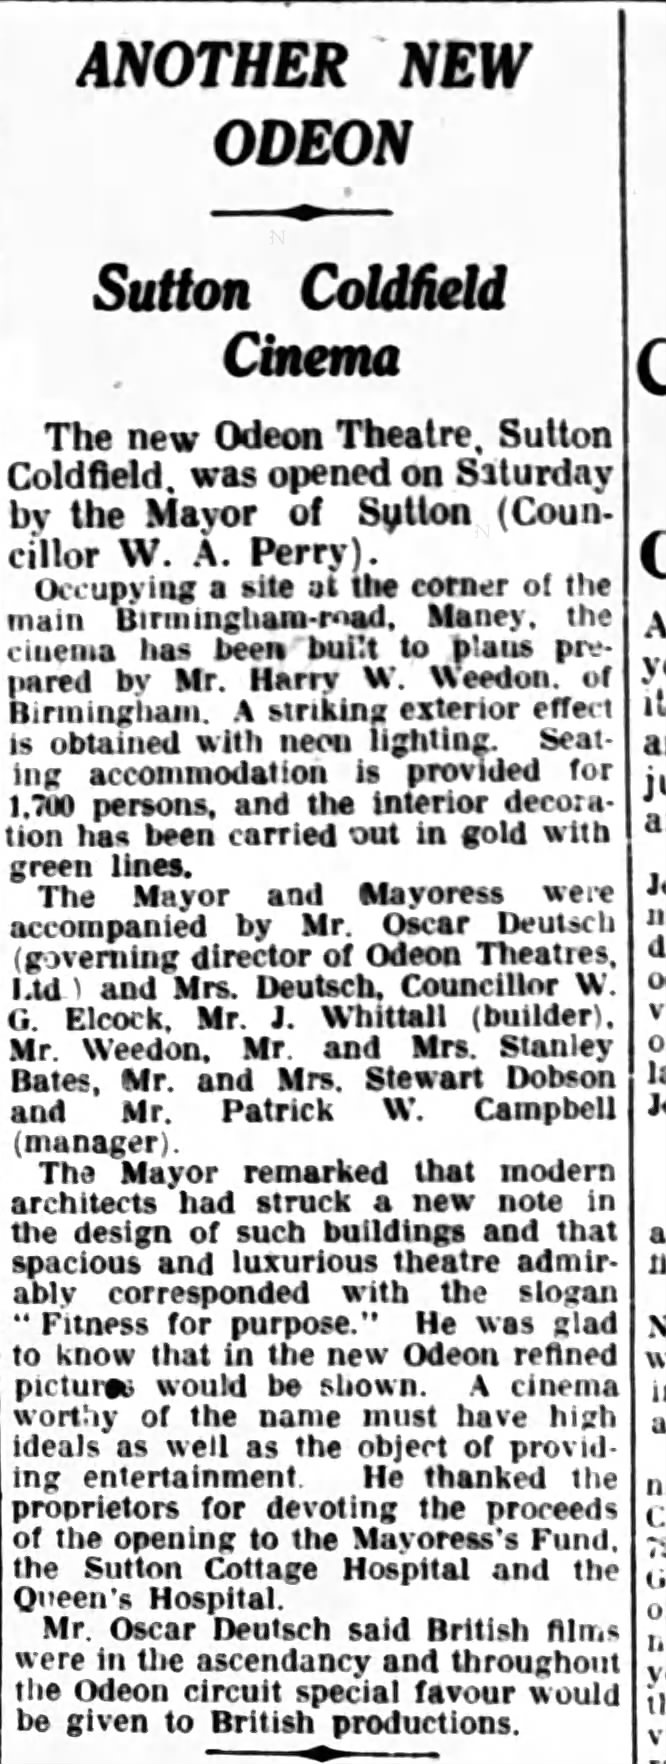 Odeon Sutton Coldfield opening